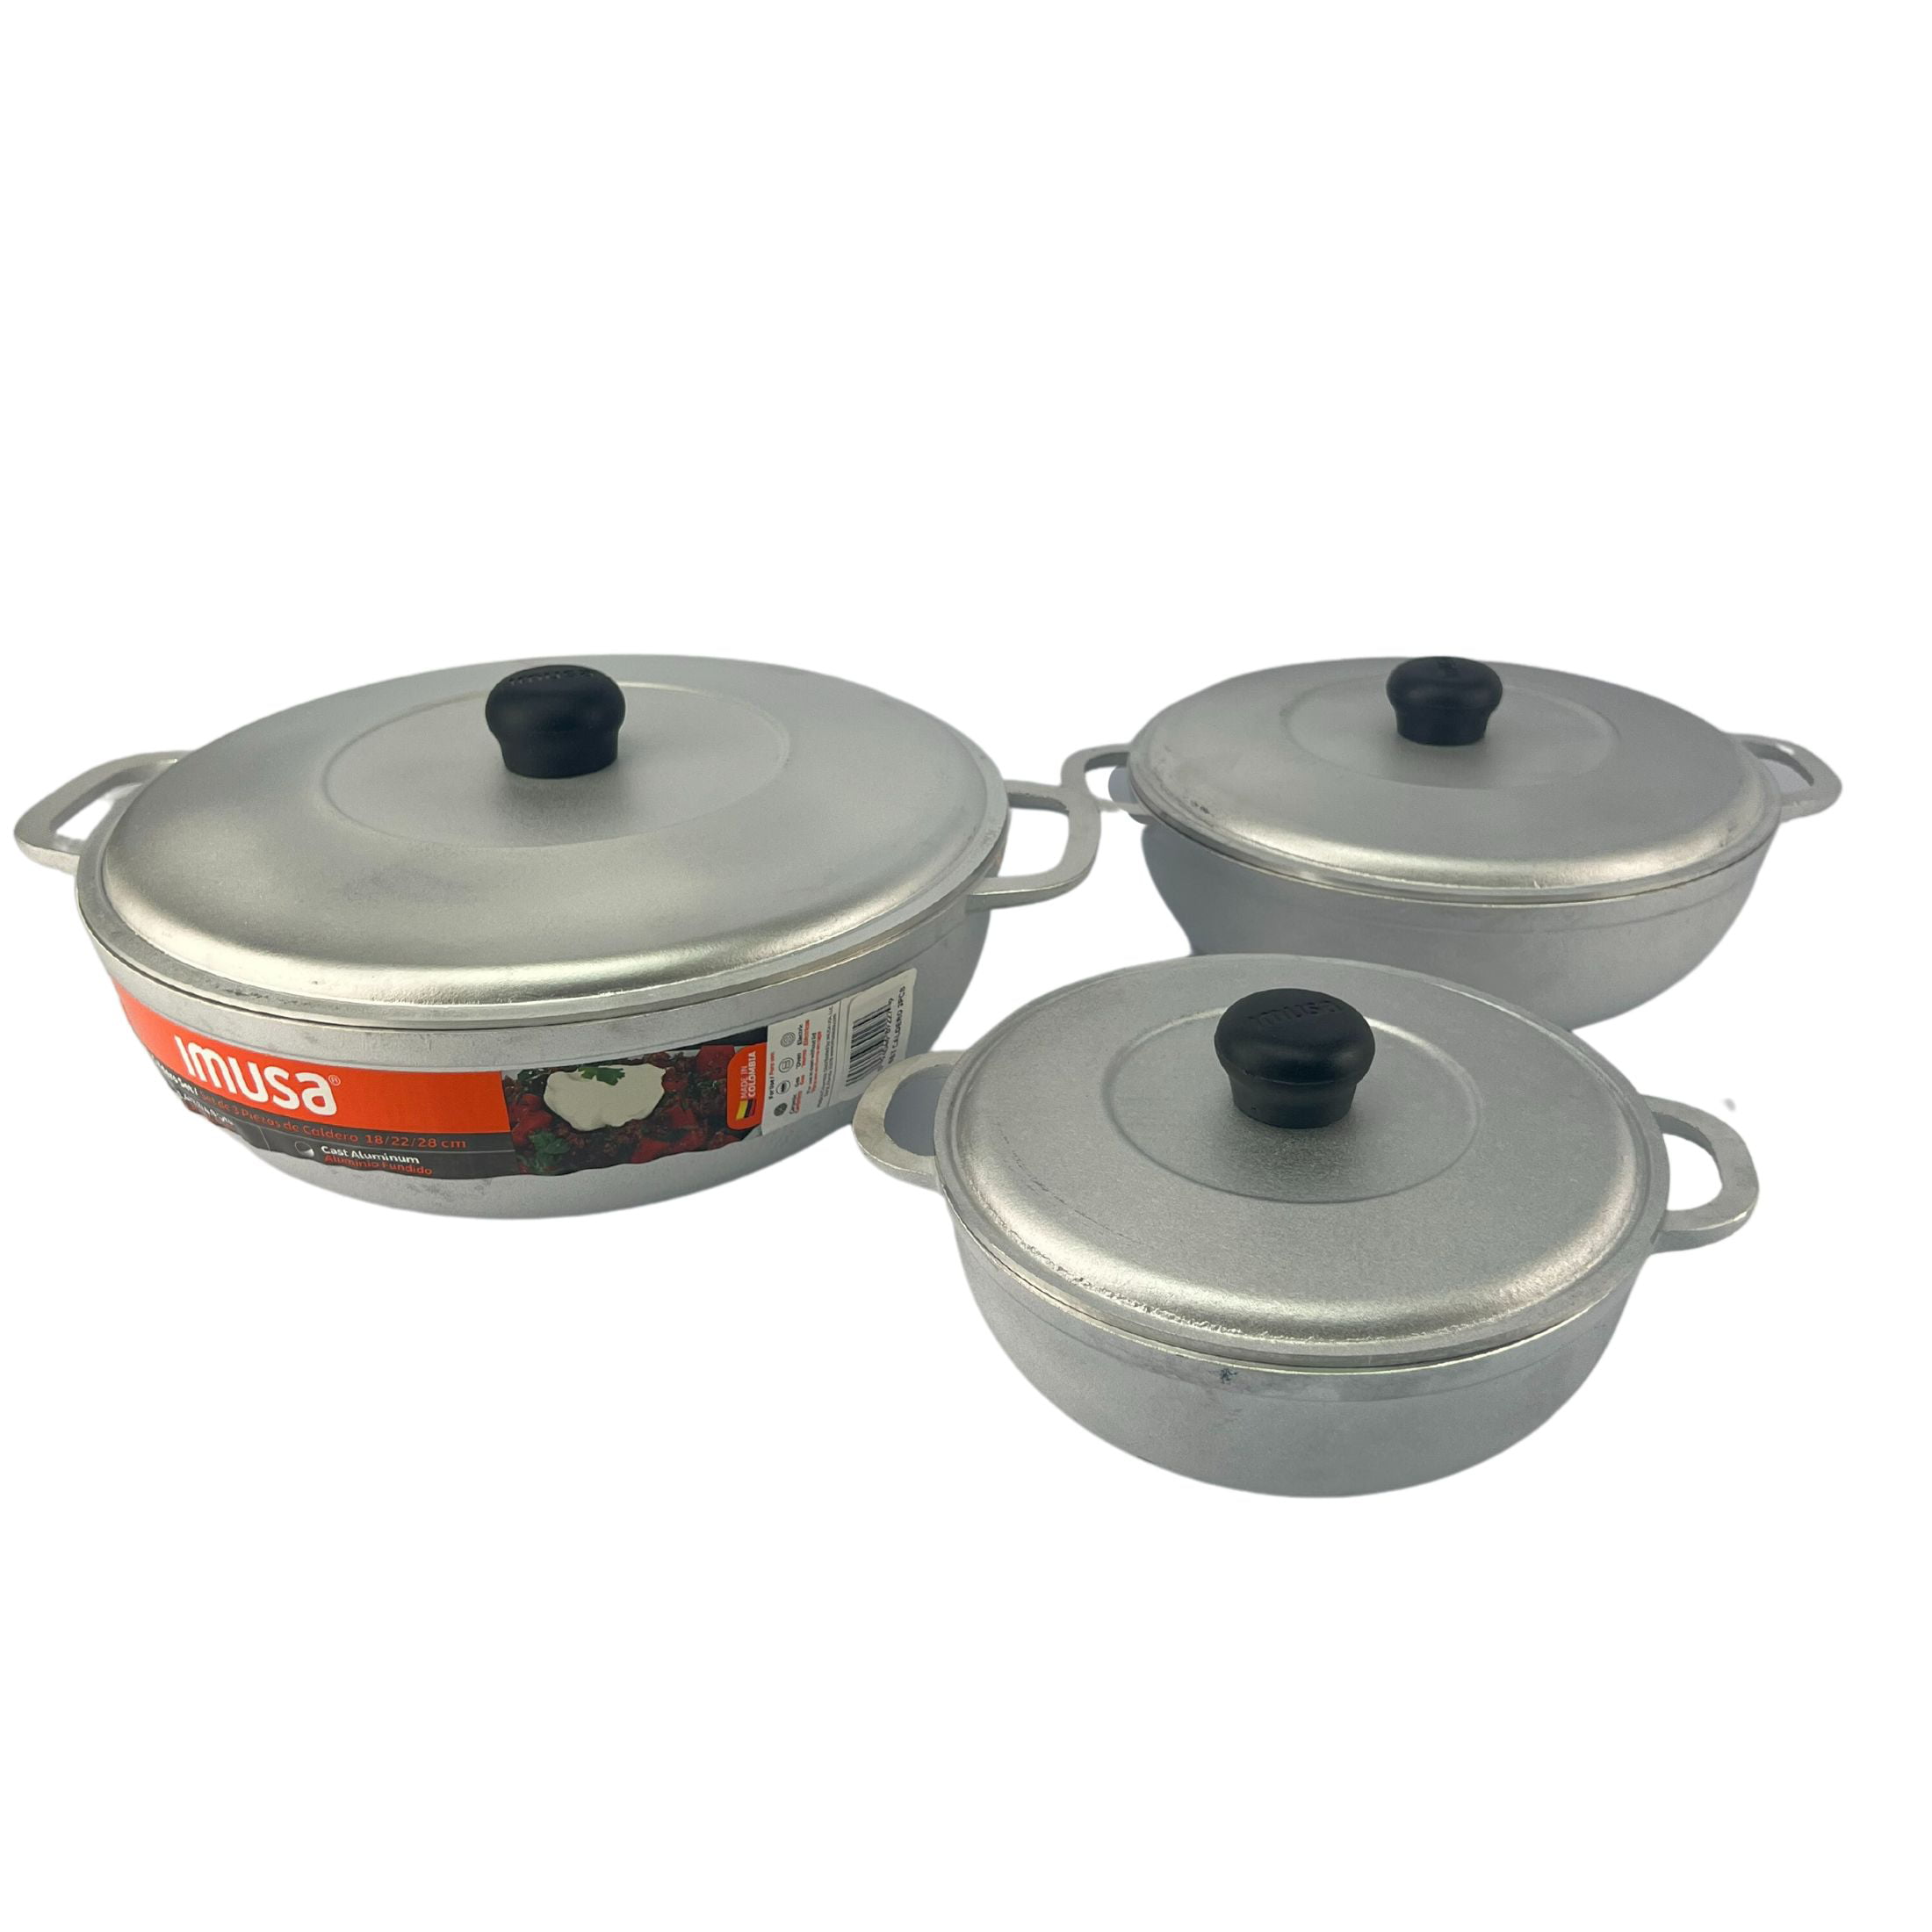 IMUSA 3pc Traditional Caldero Set with Glass Lid